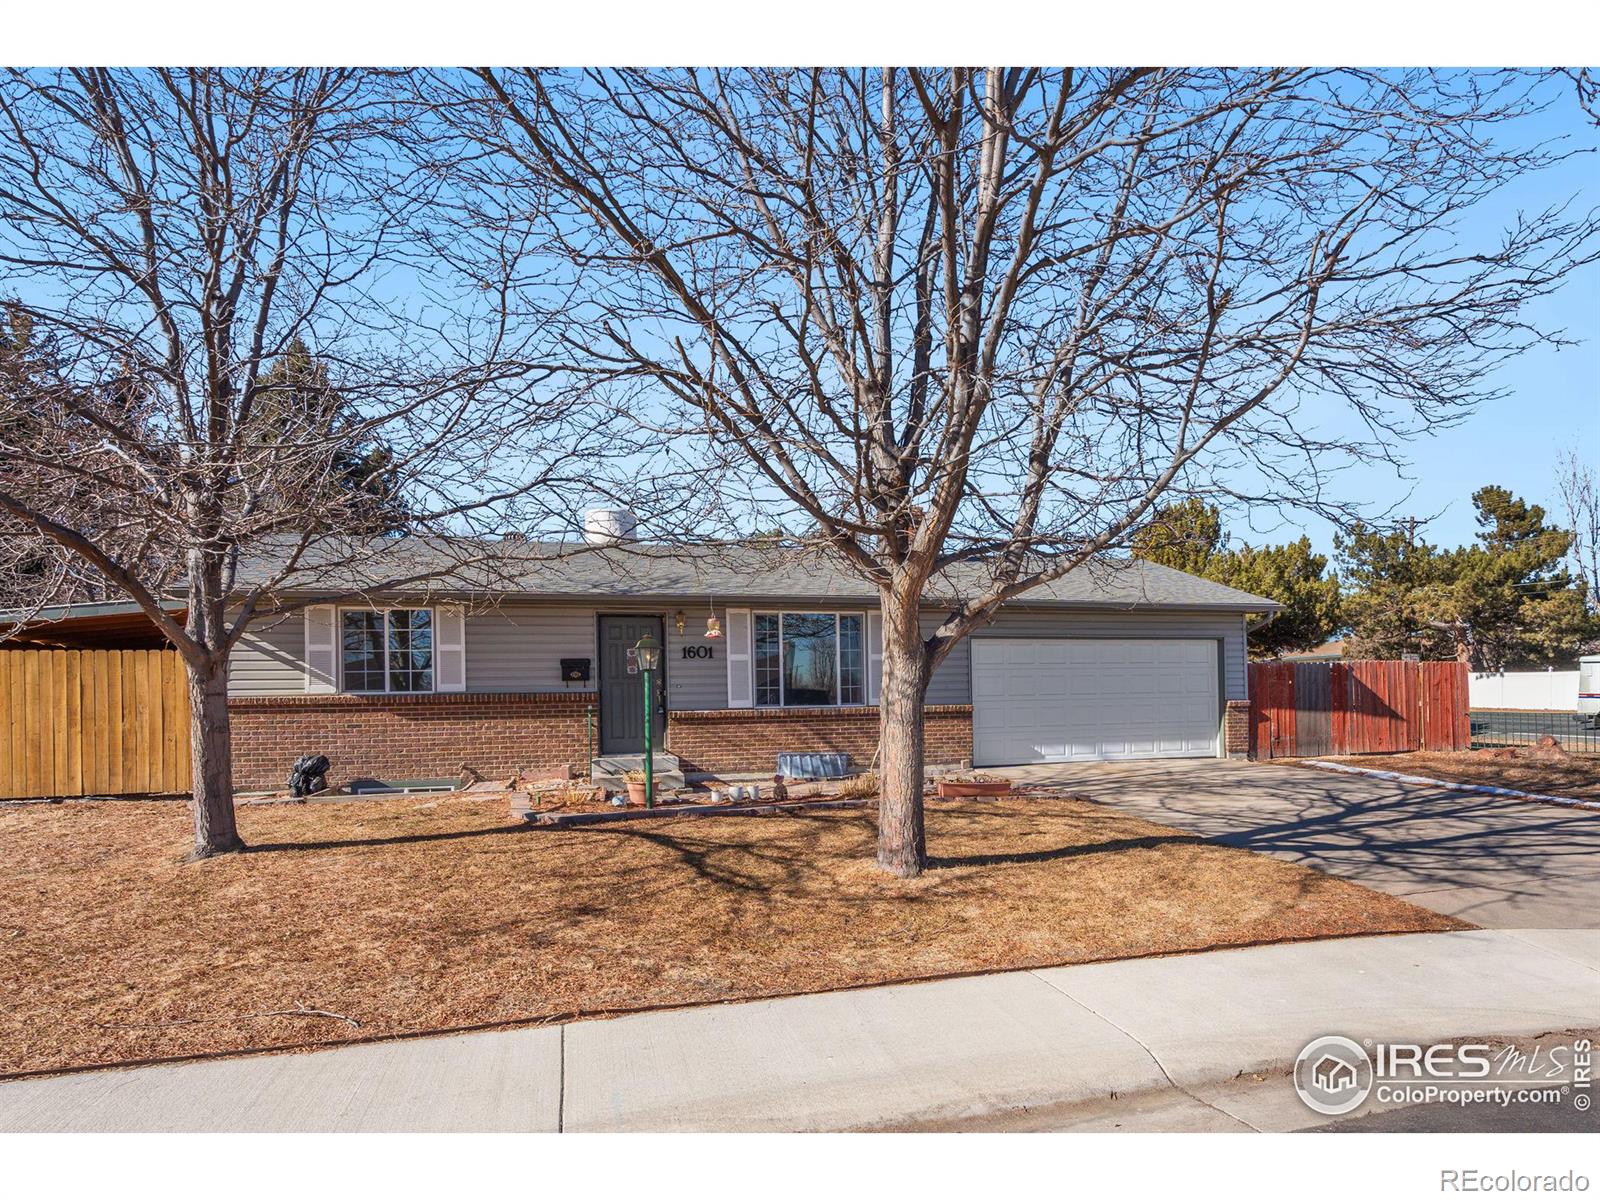 1601  31st Avenue, greeley MLS: 4567891002384 Beds: 4 Baths: 2 Price: $399,000